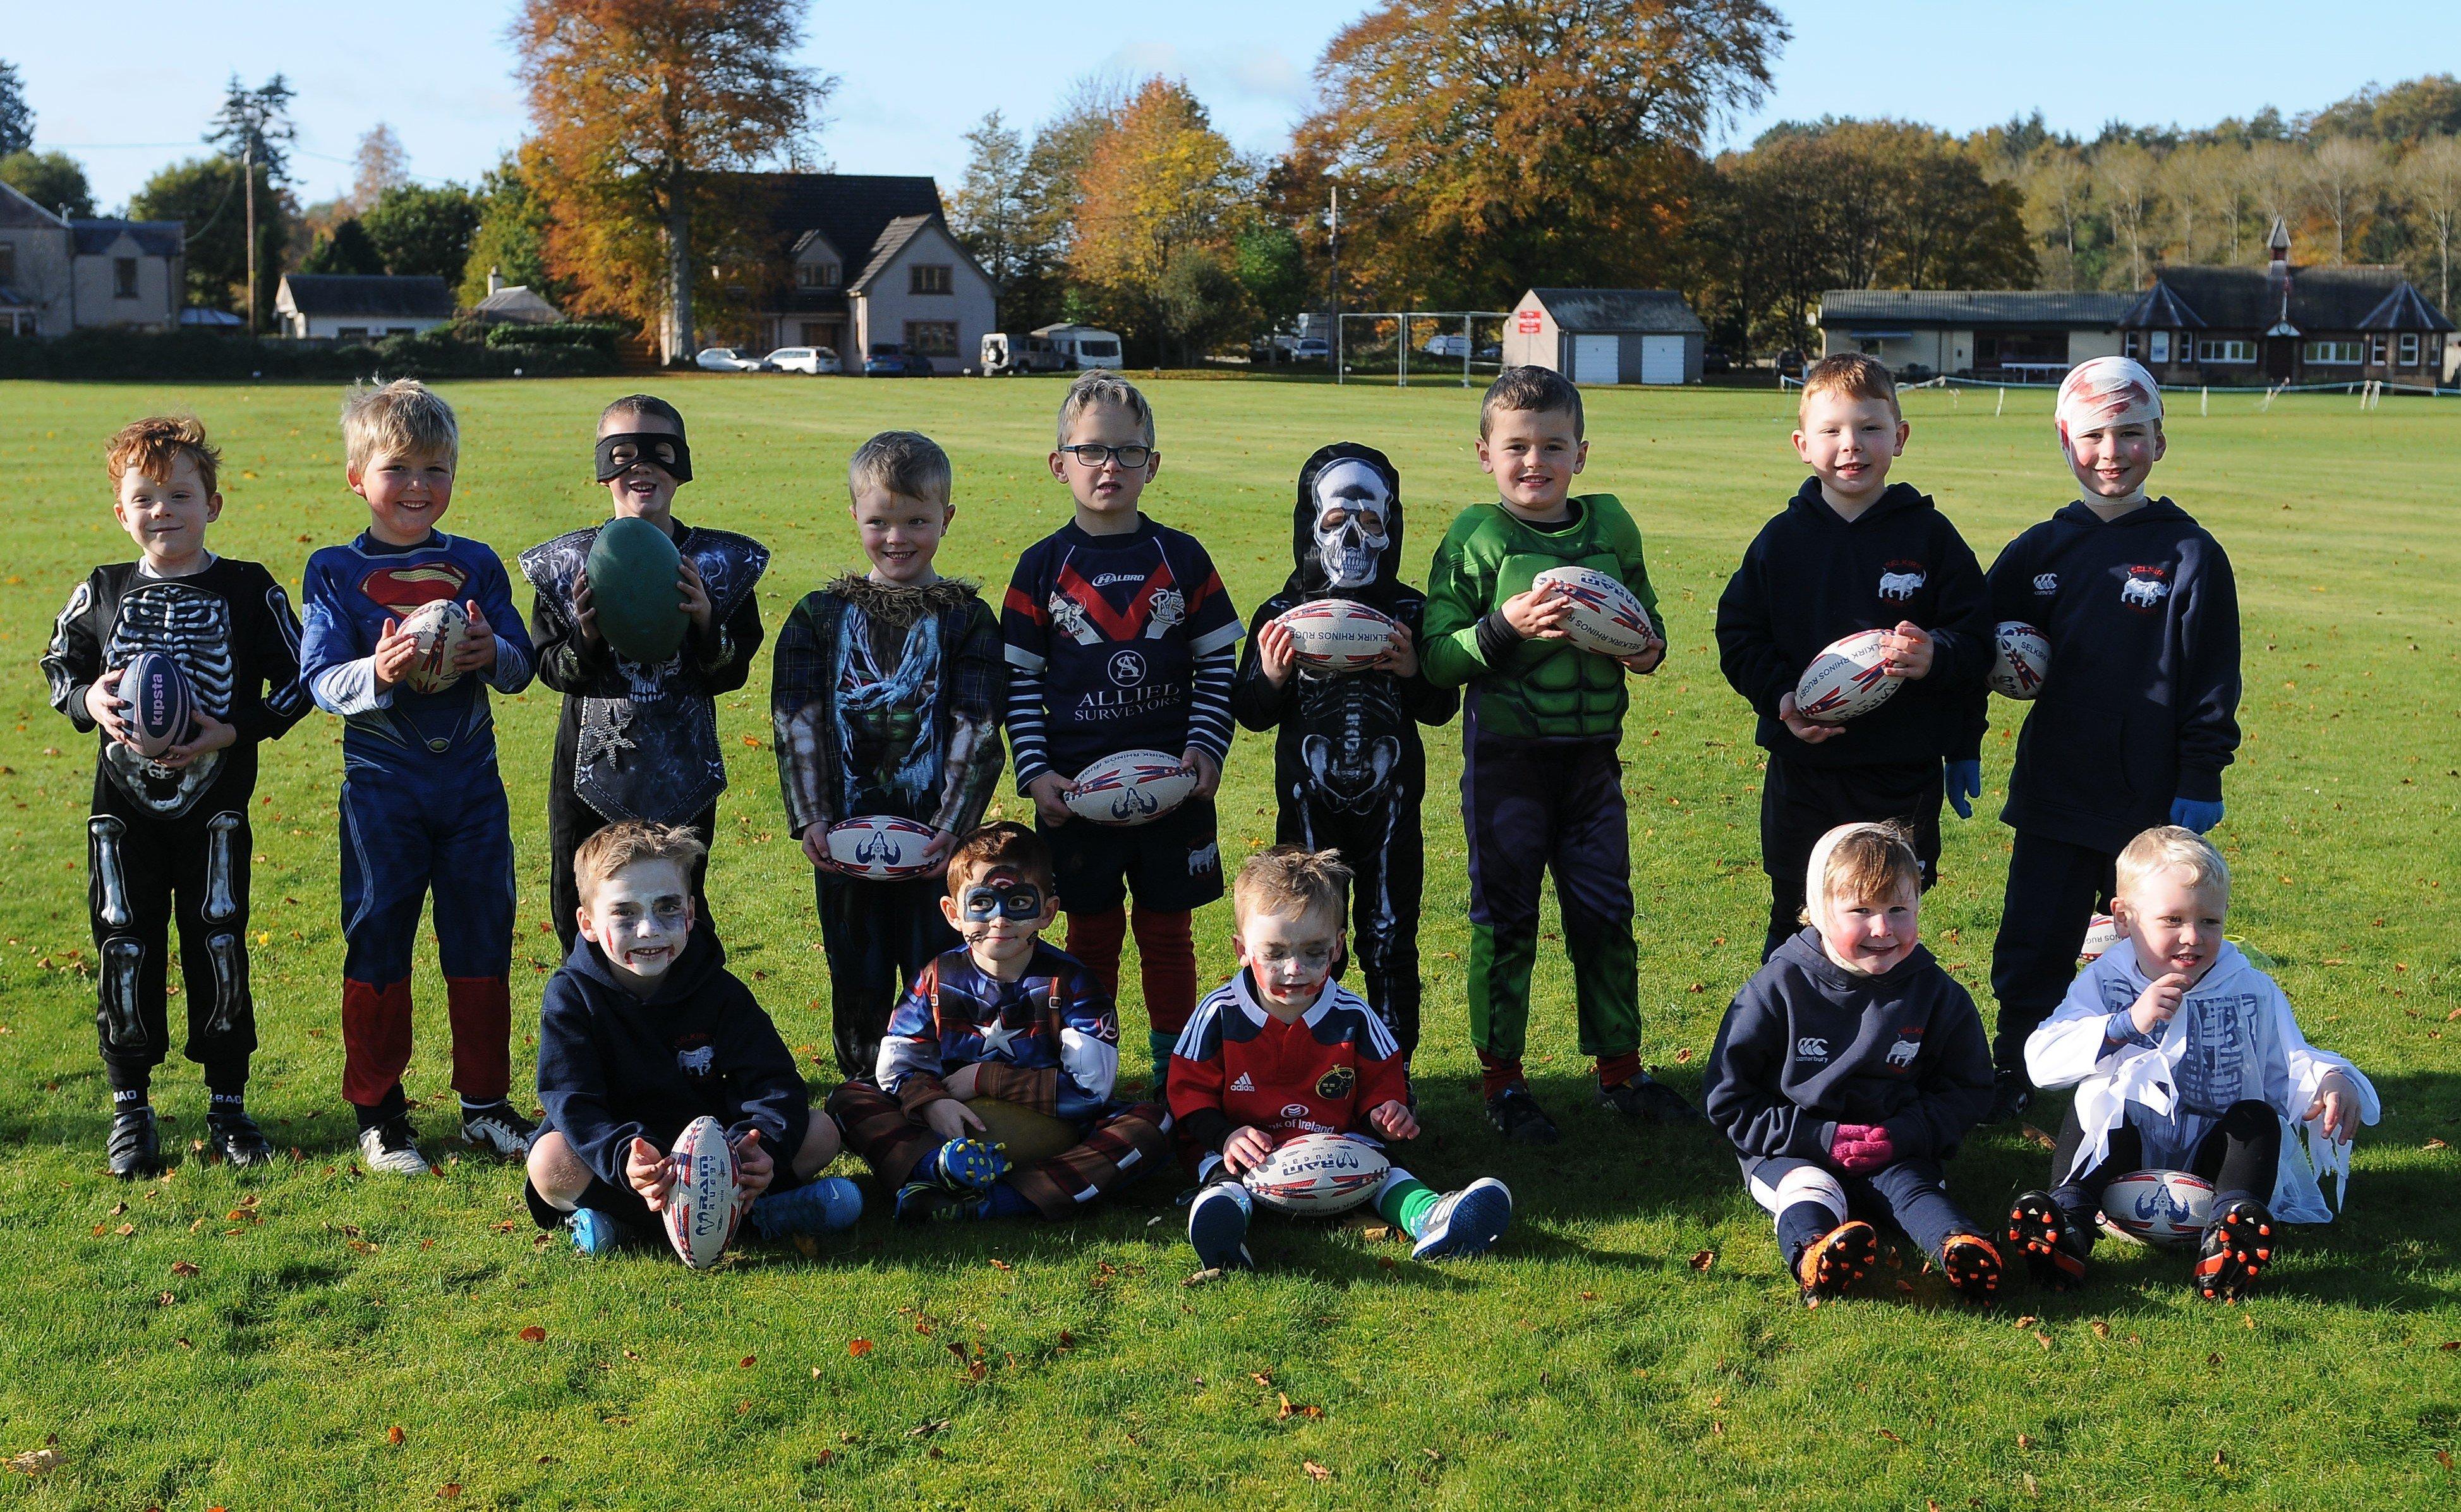 Players in fancy dress at a Halloween-themed Selkirk Rhinos training session.